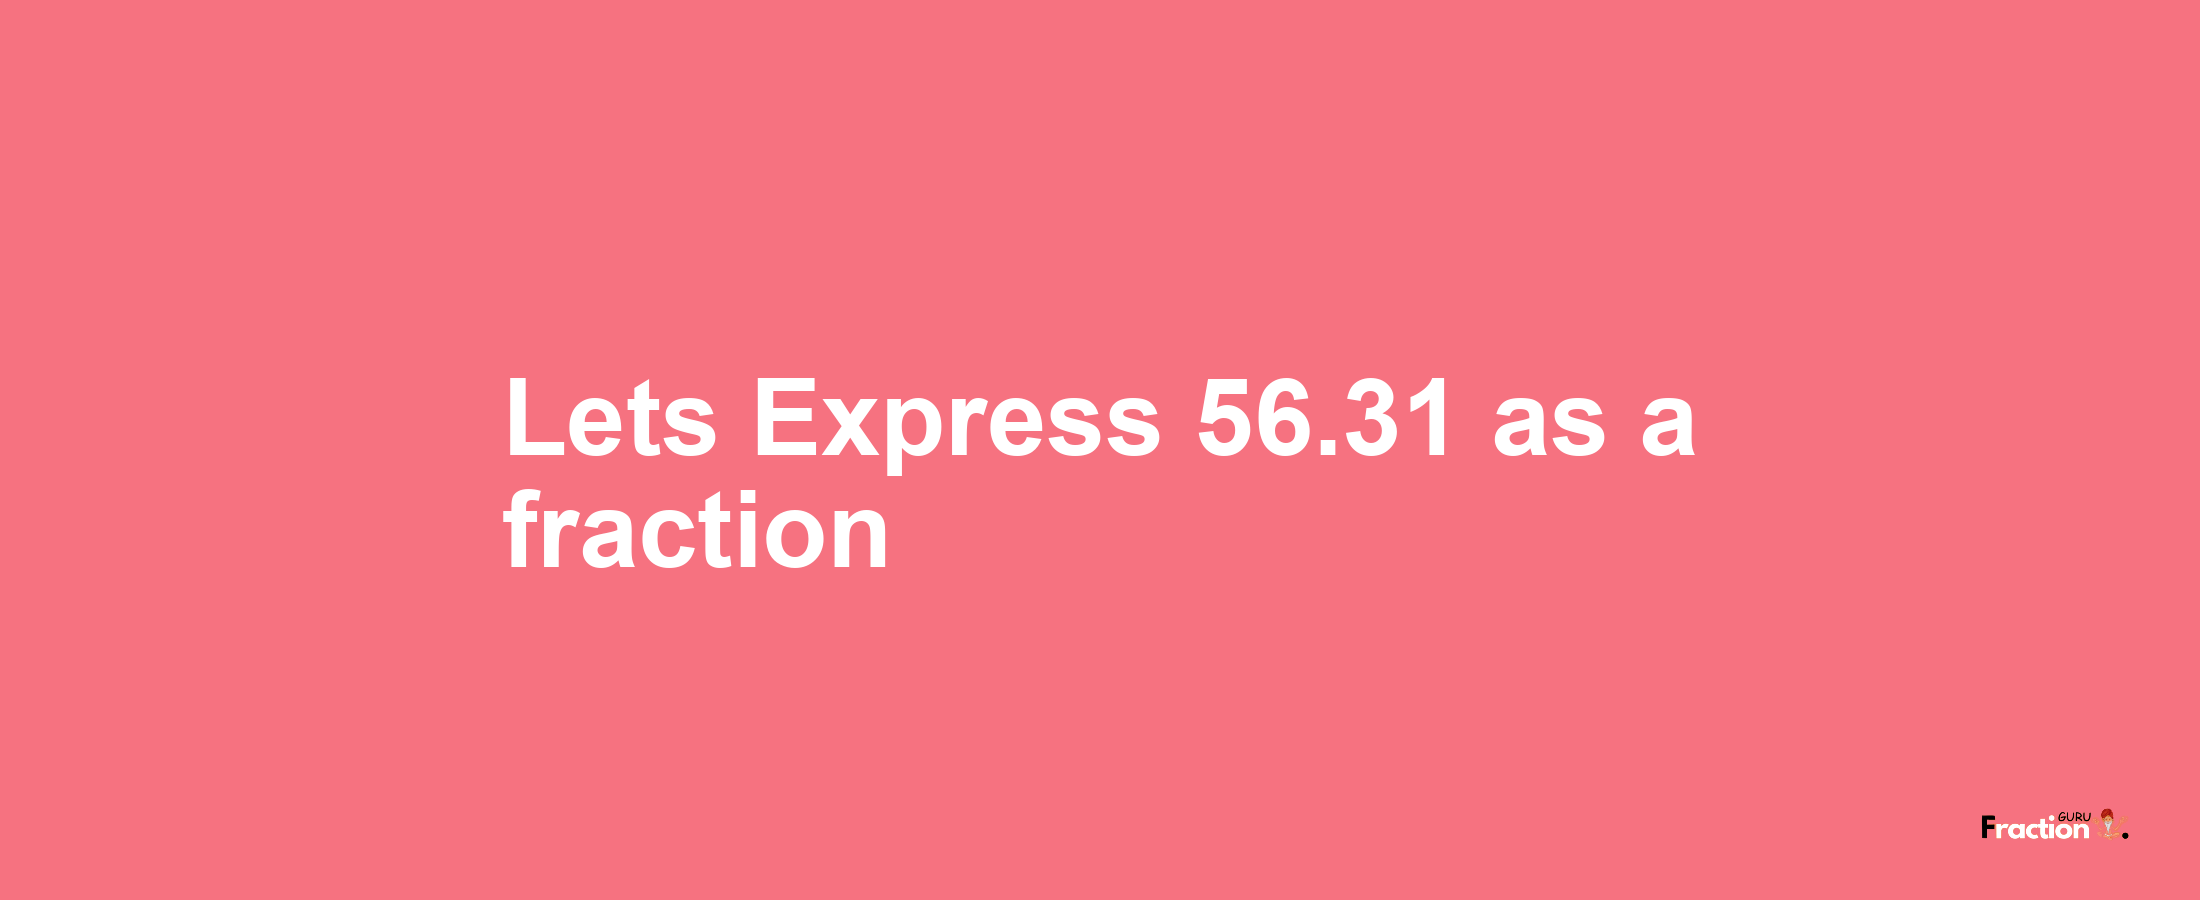 Lets Express 56.31 as afraction